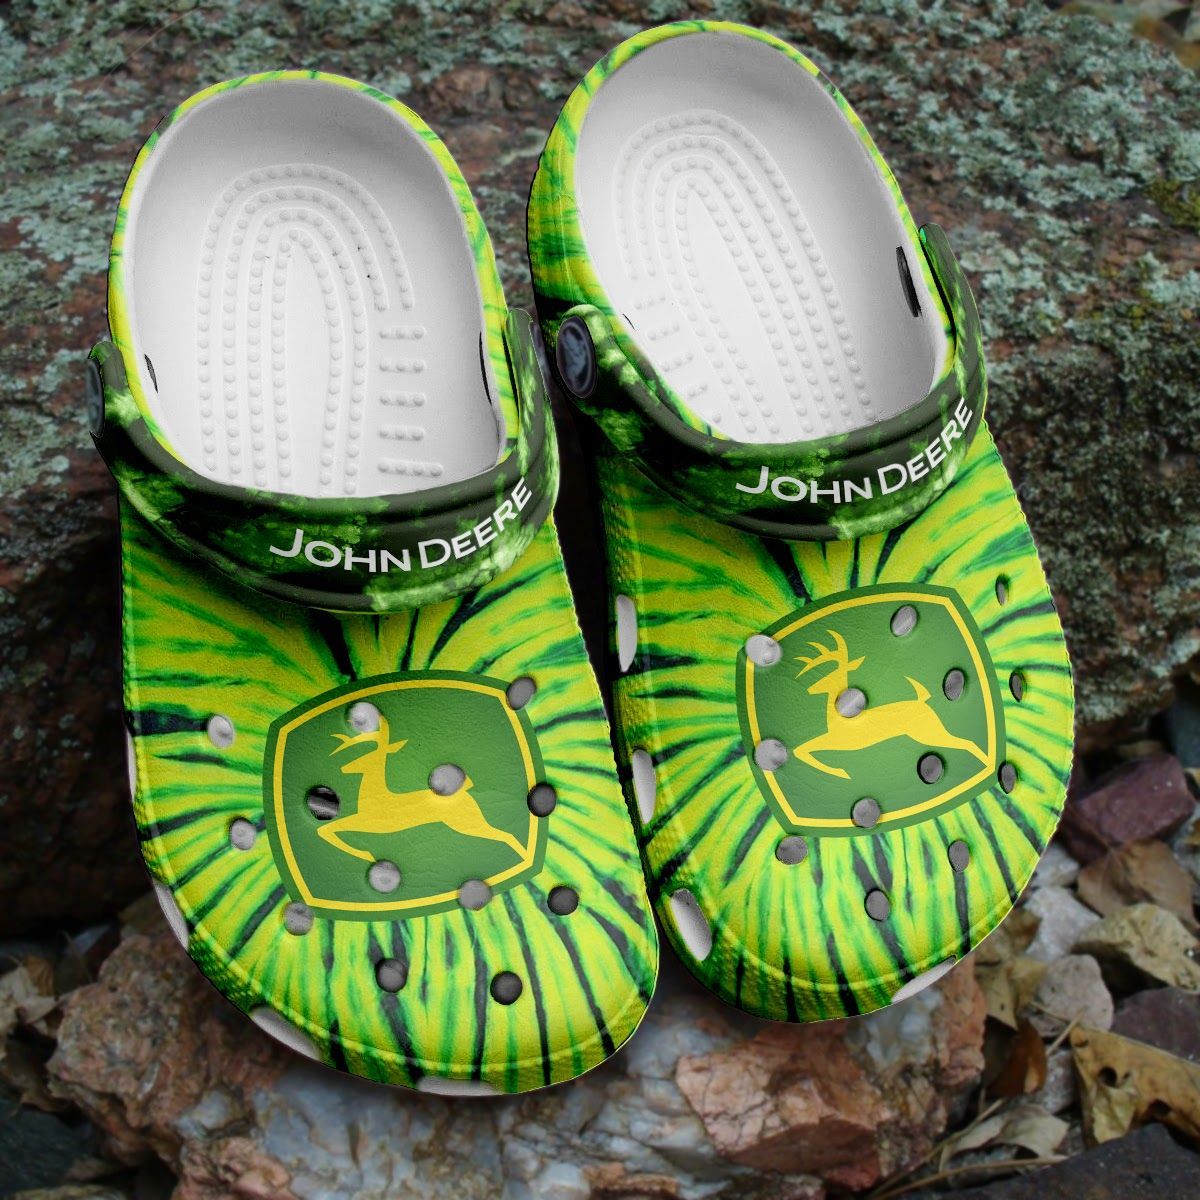 Here's a look at some amazing Crocband shoes 99